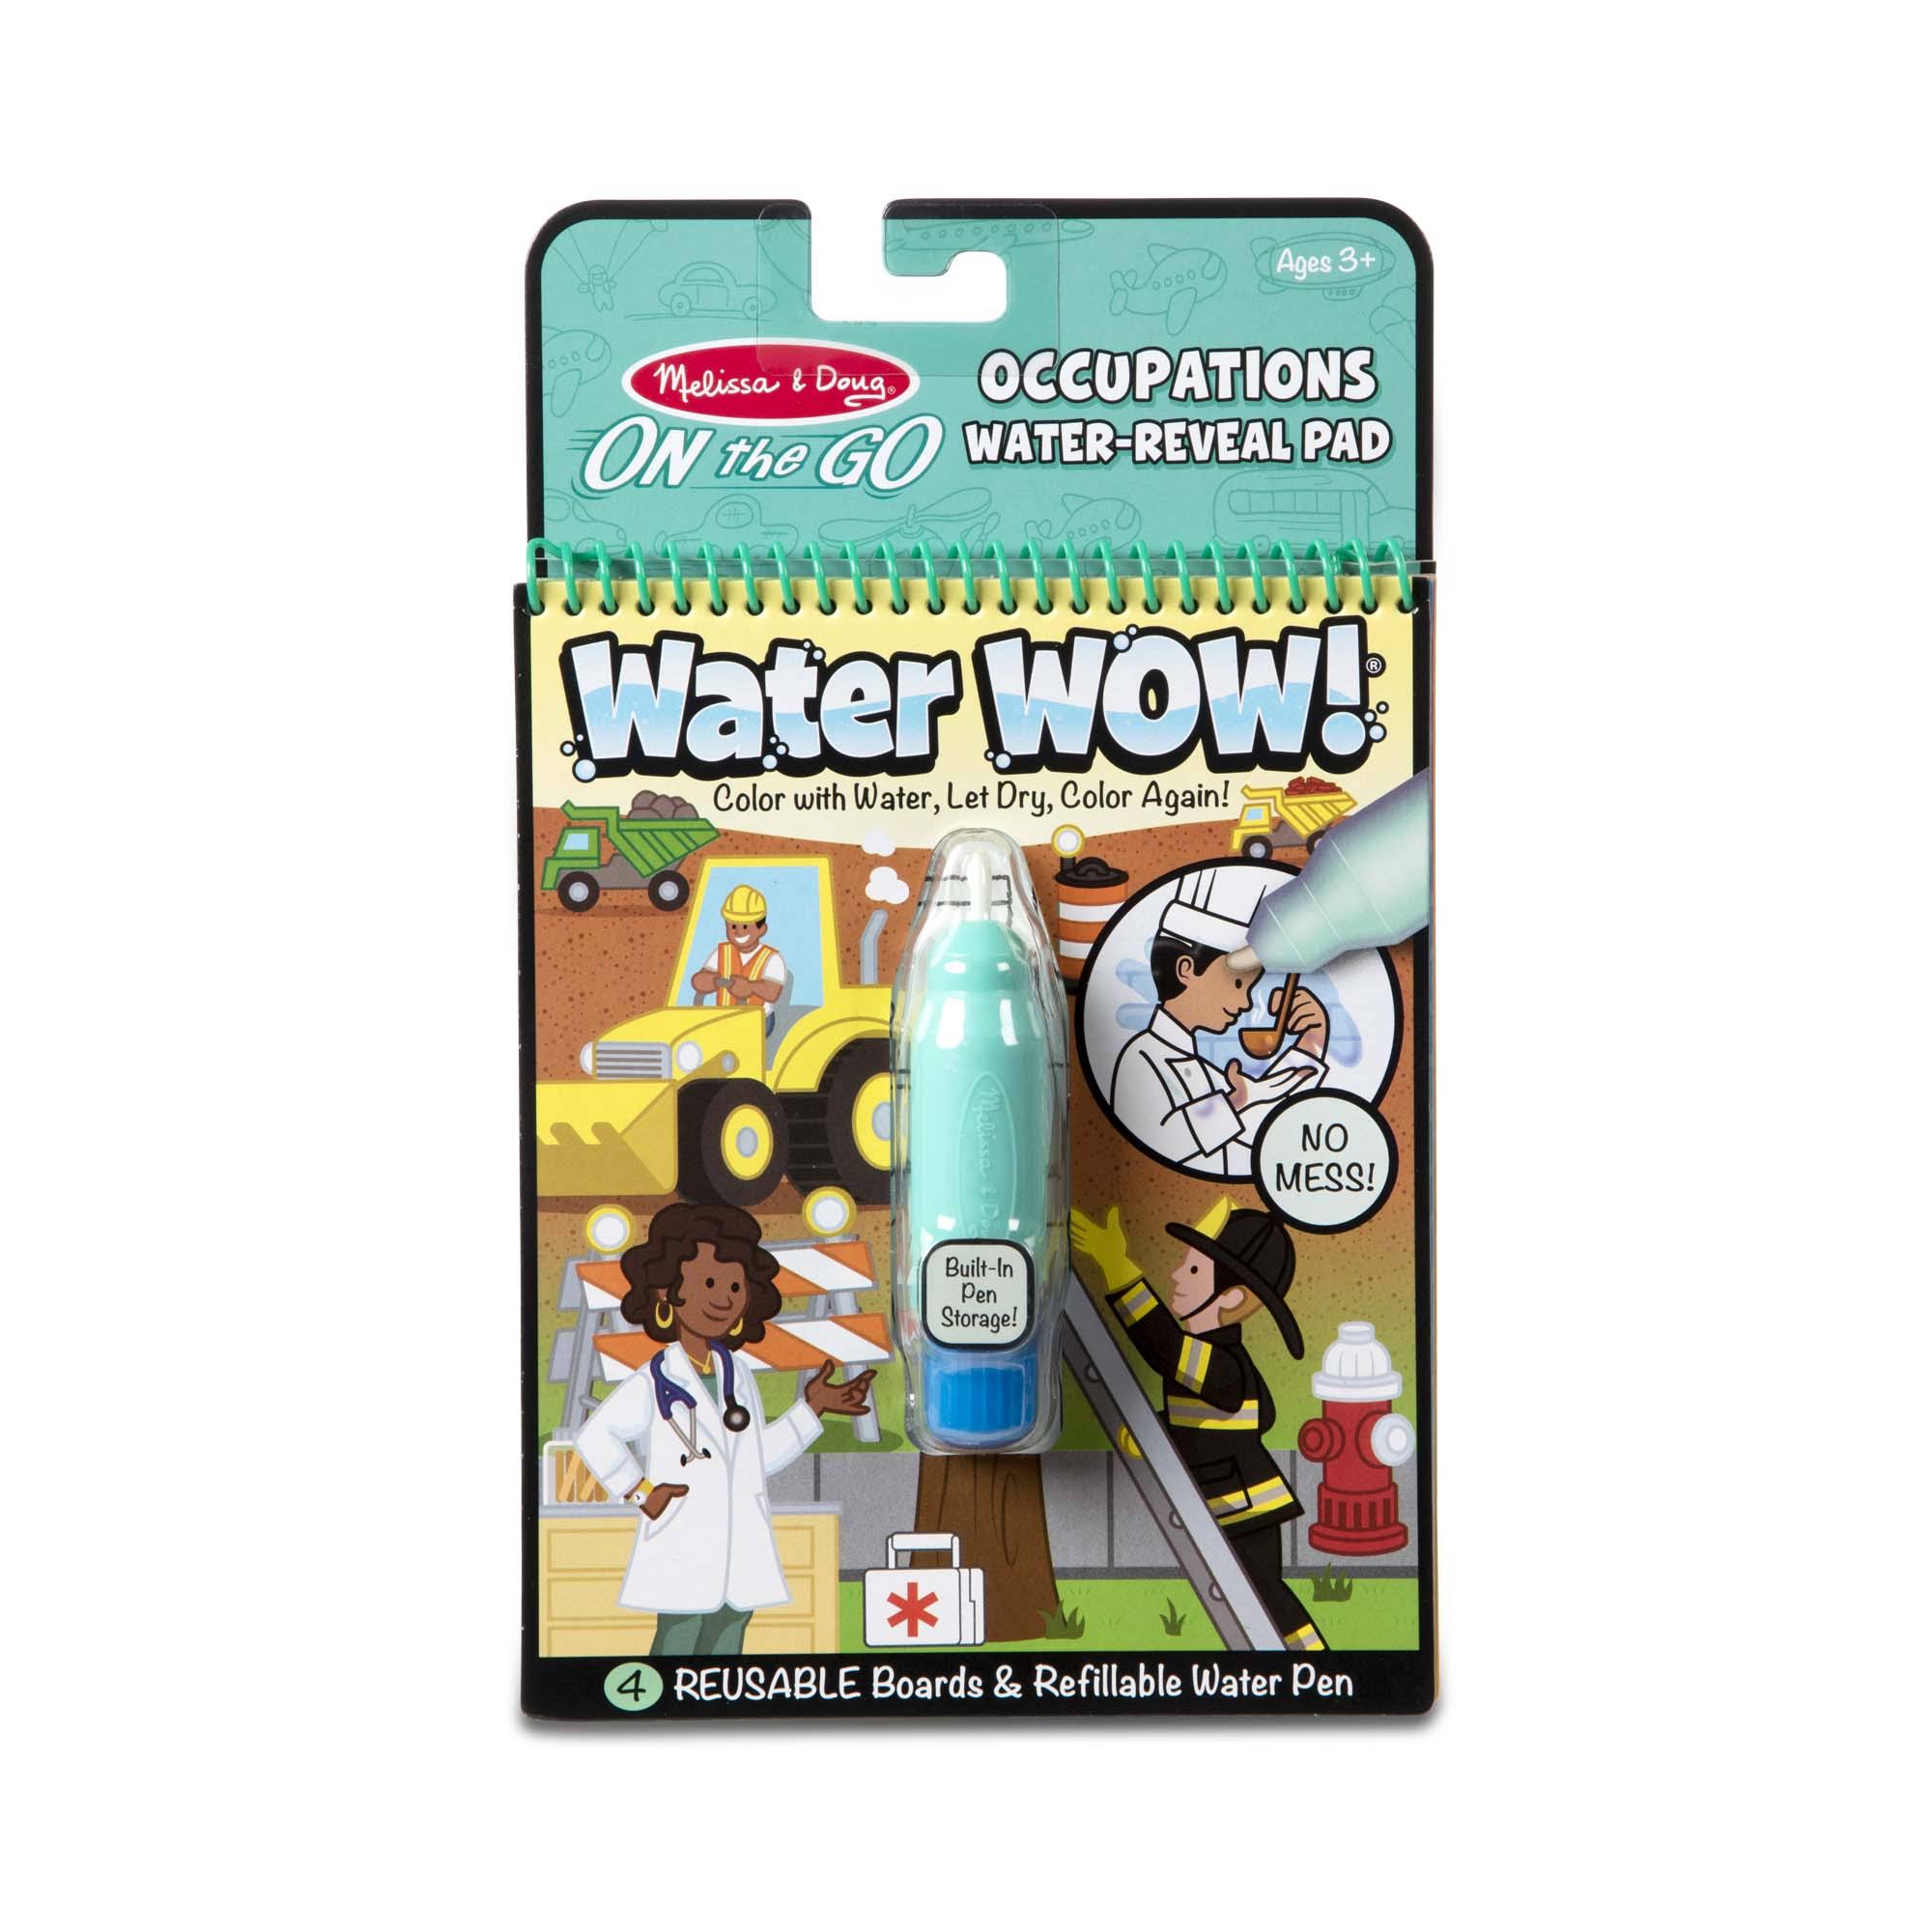 Melissa & Doug - On The Go - Water WOW! Occupations